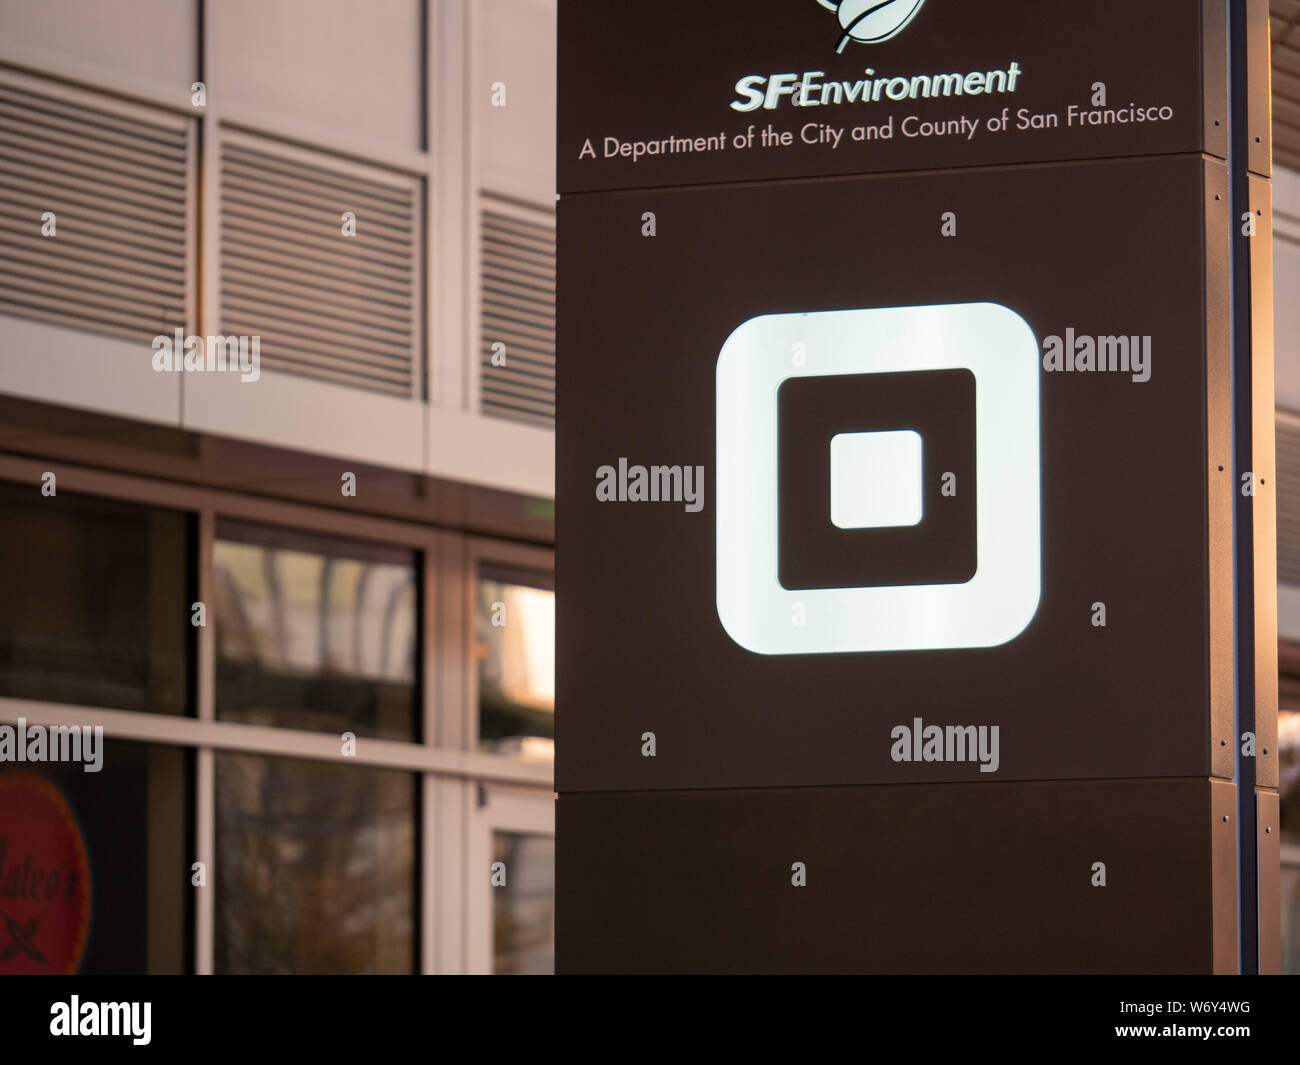 Square payment processing sign outside of San Francisco headquarters